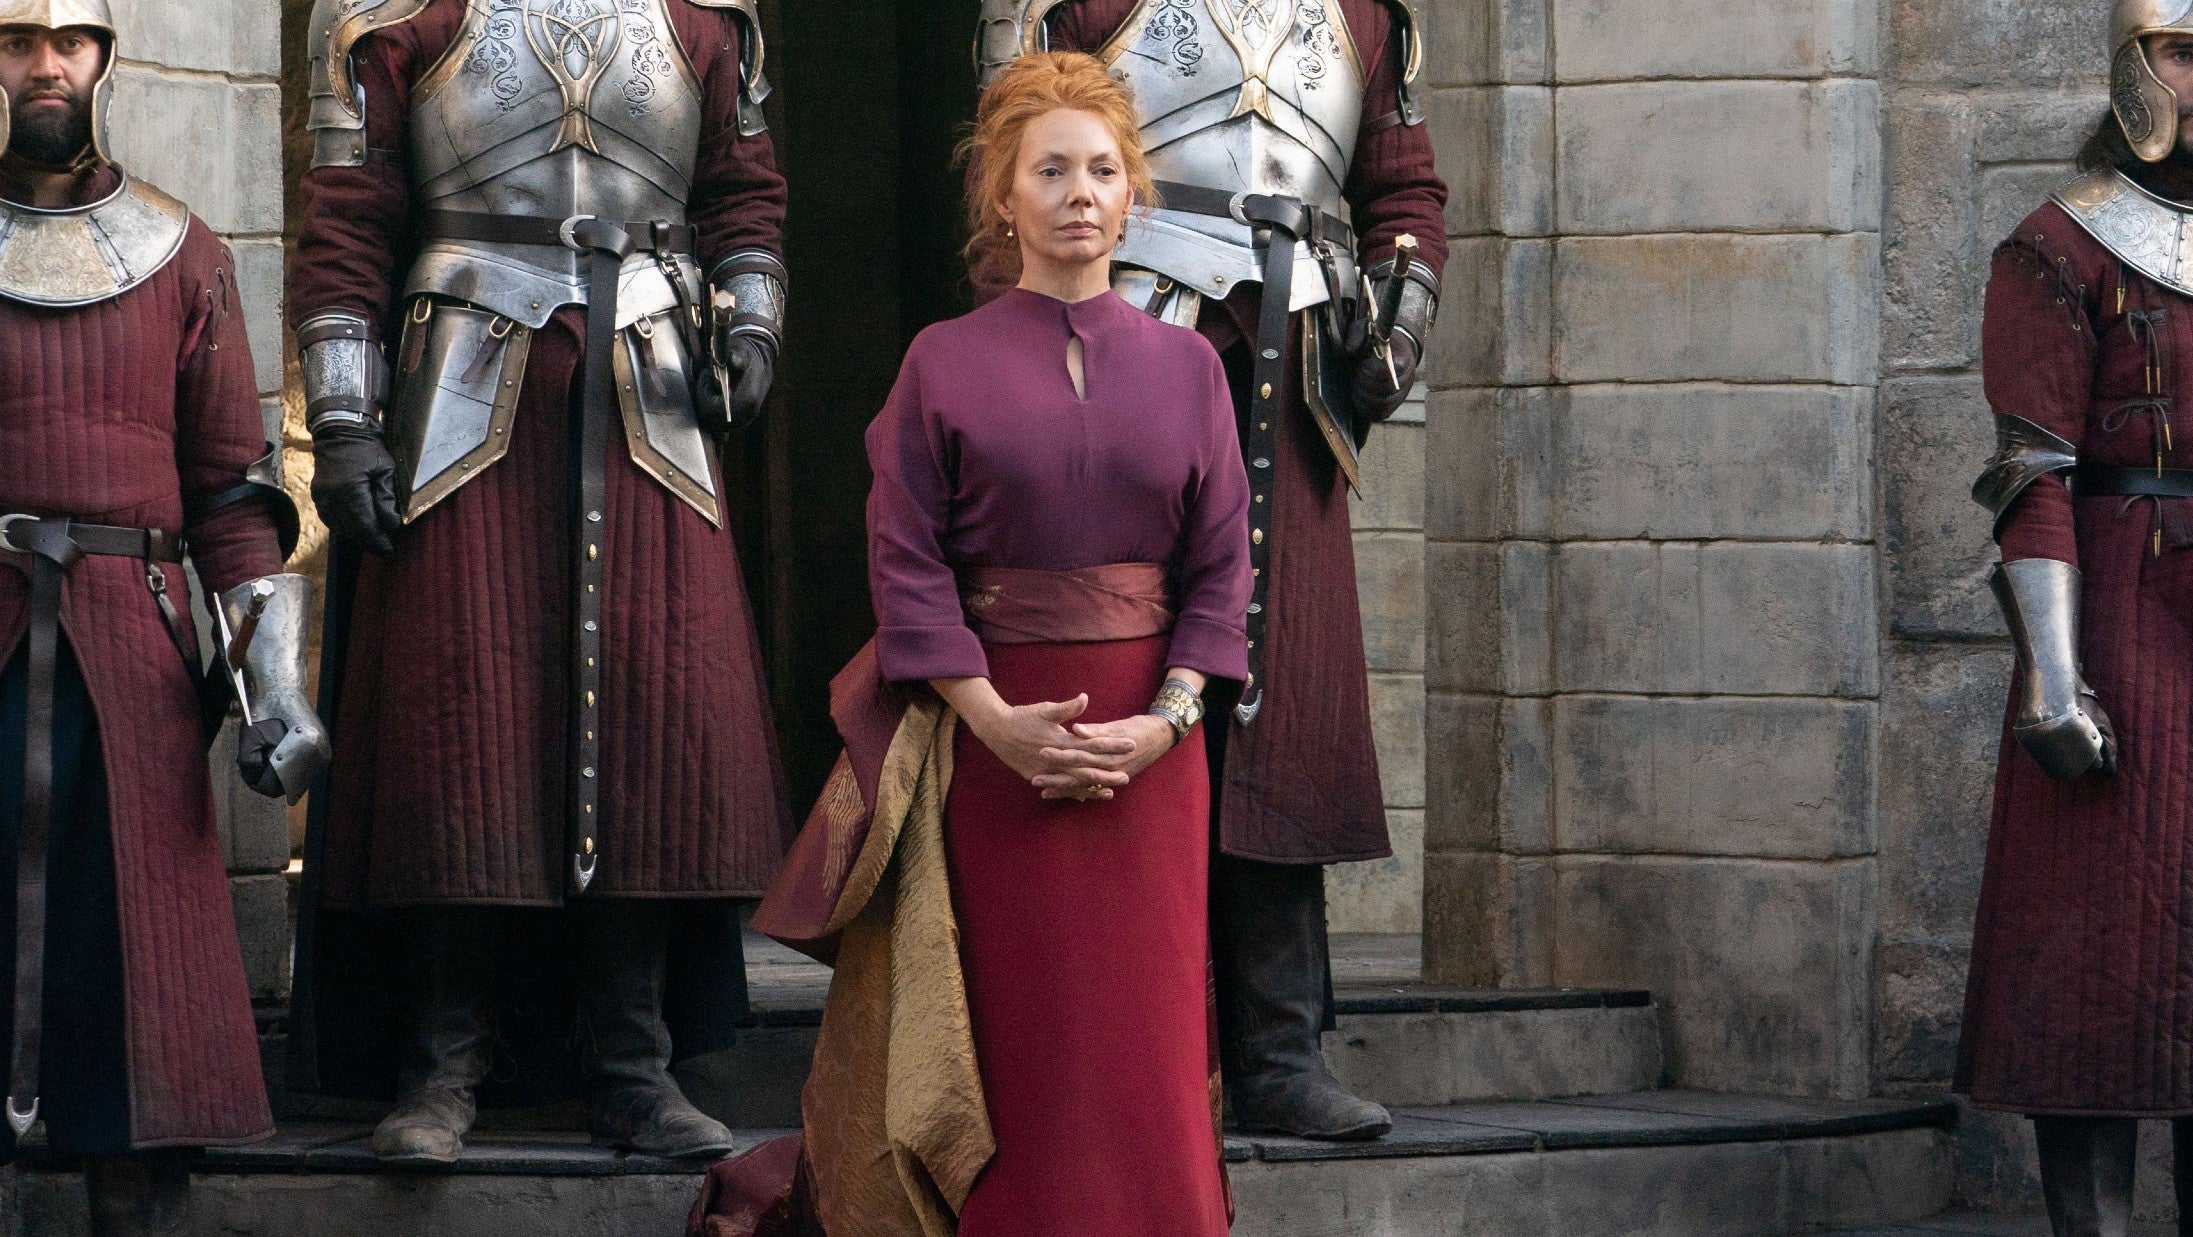 Joanne Whalley reprises her role as, now Queen, Sorsha. (Image: Lucasfilm)